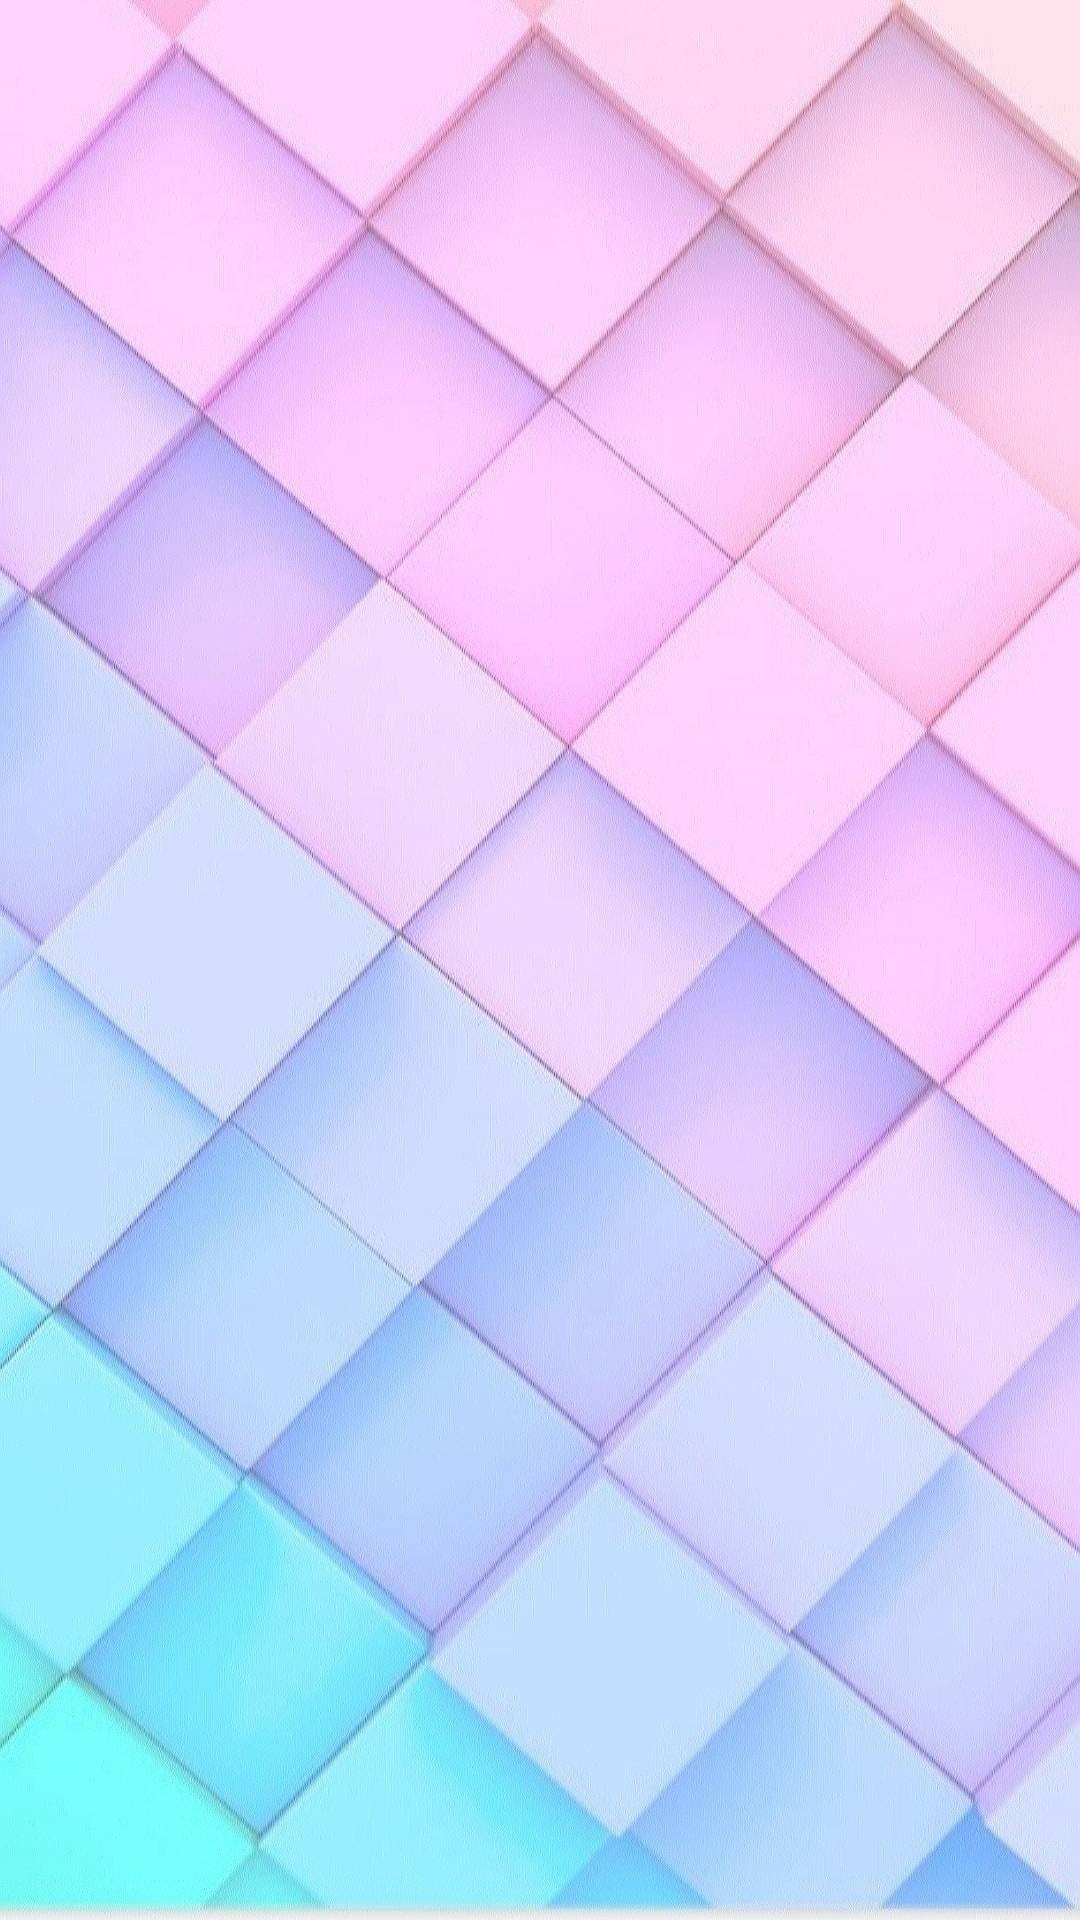 Geometric iPhone 8 Wallpaper with high-resolution 1080x1920 pixel. You can use this wallpaper for your iPhone 5, 6, 7, 8, X, XS, XR backgrounds, Mobile Screensaver, or iPad Lock Screen - Pastel